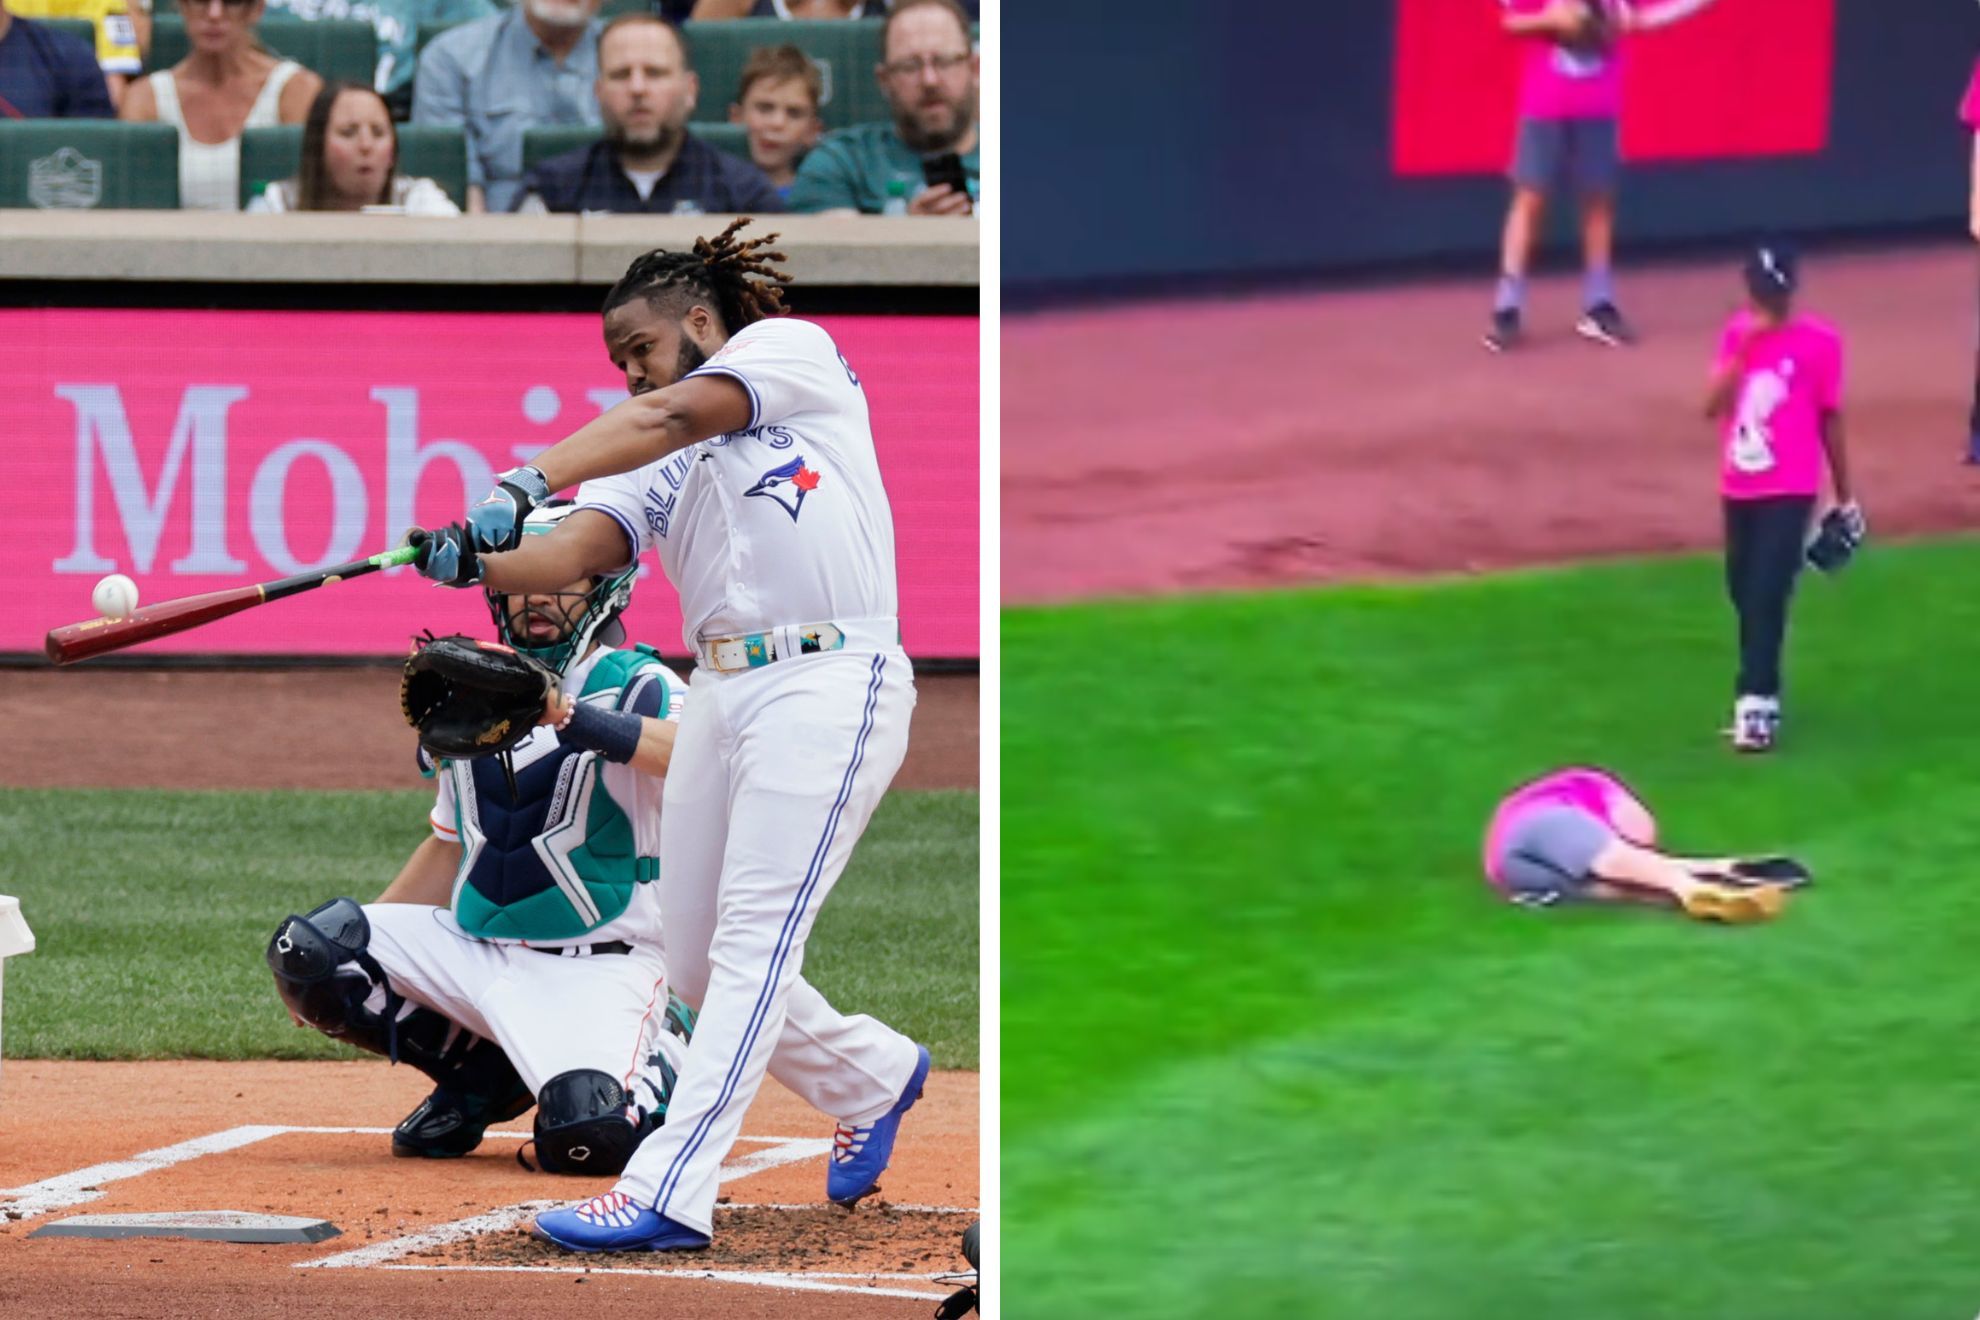 Vladimir Guerrero Jr. knocks out small child with baseball during Home Run Derby